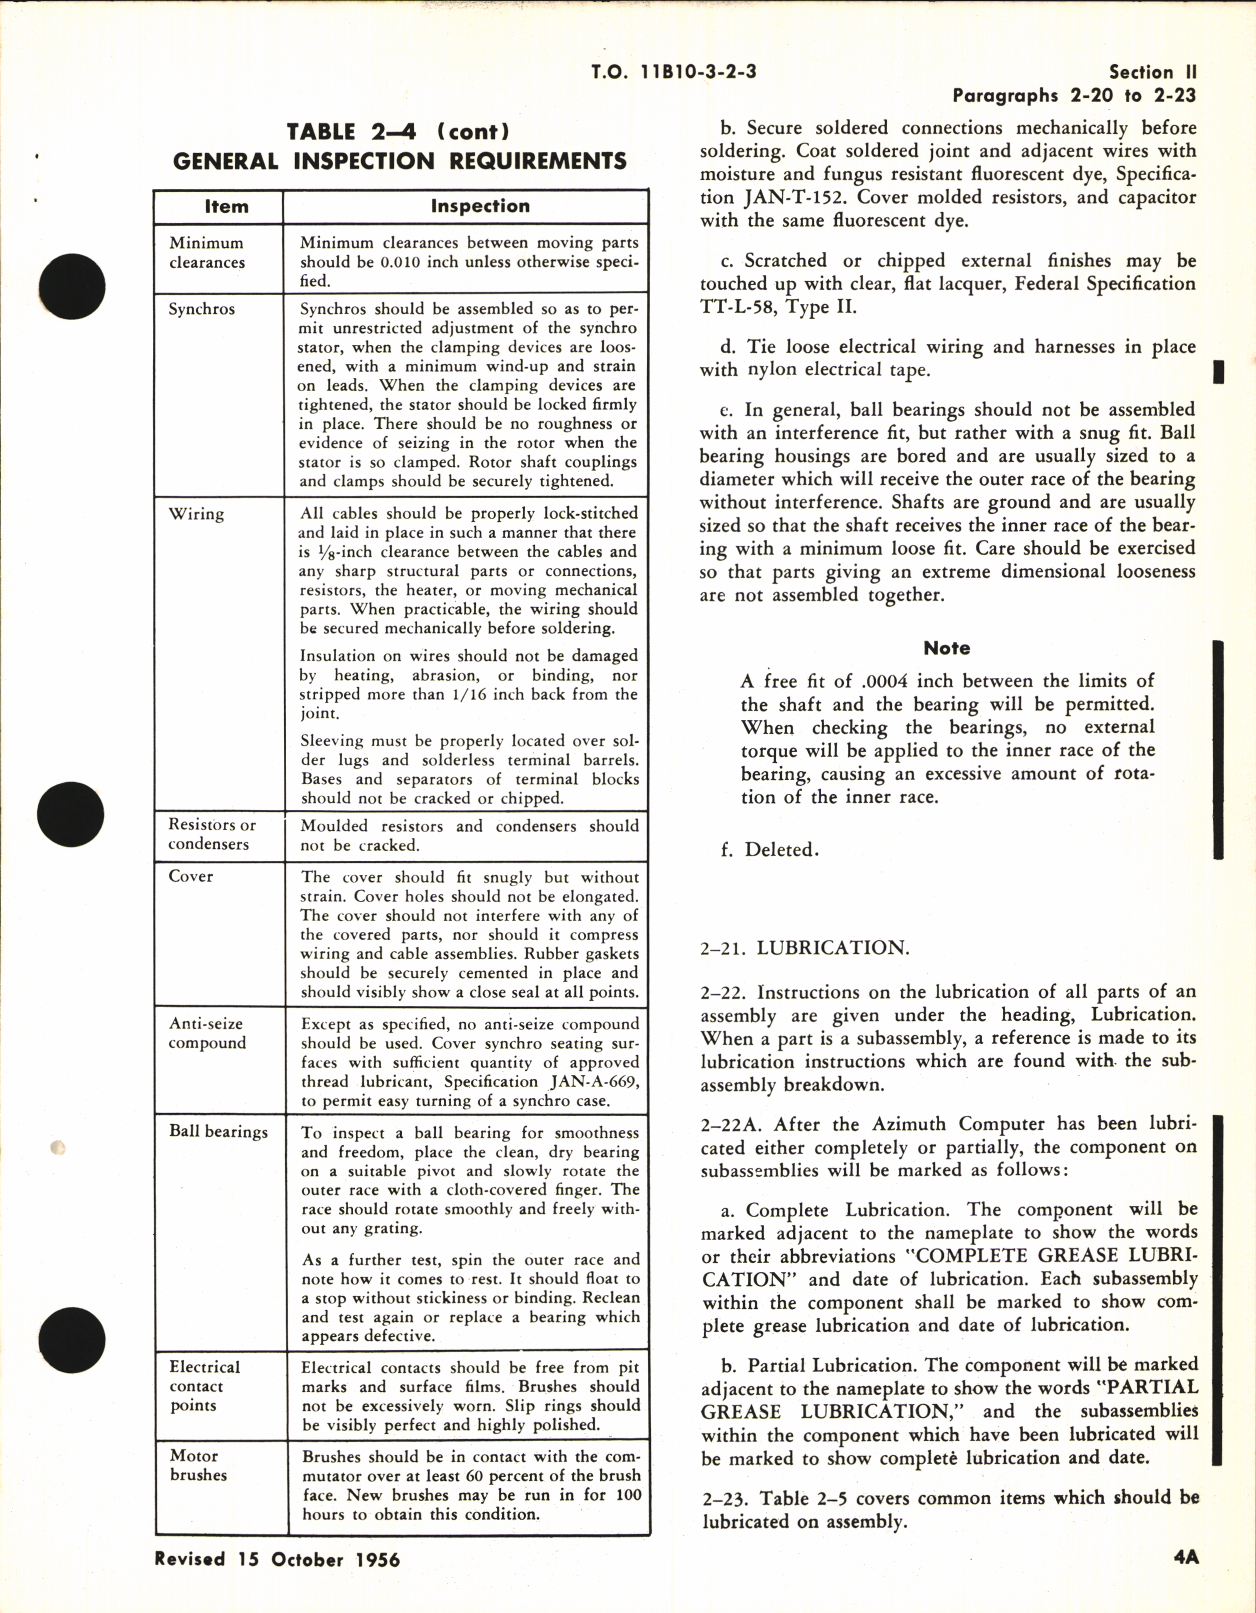 Sample page 5 from AirCorps Library document: Overhaul Instructions for Azimuth Computer Type CP-35/APQ-31